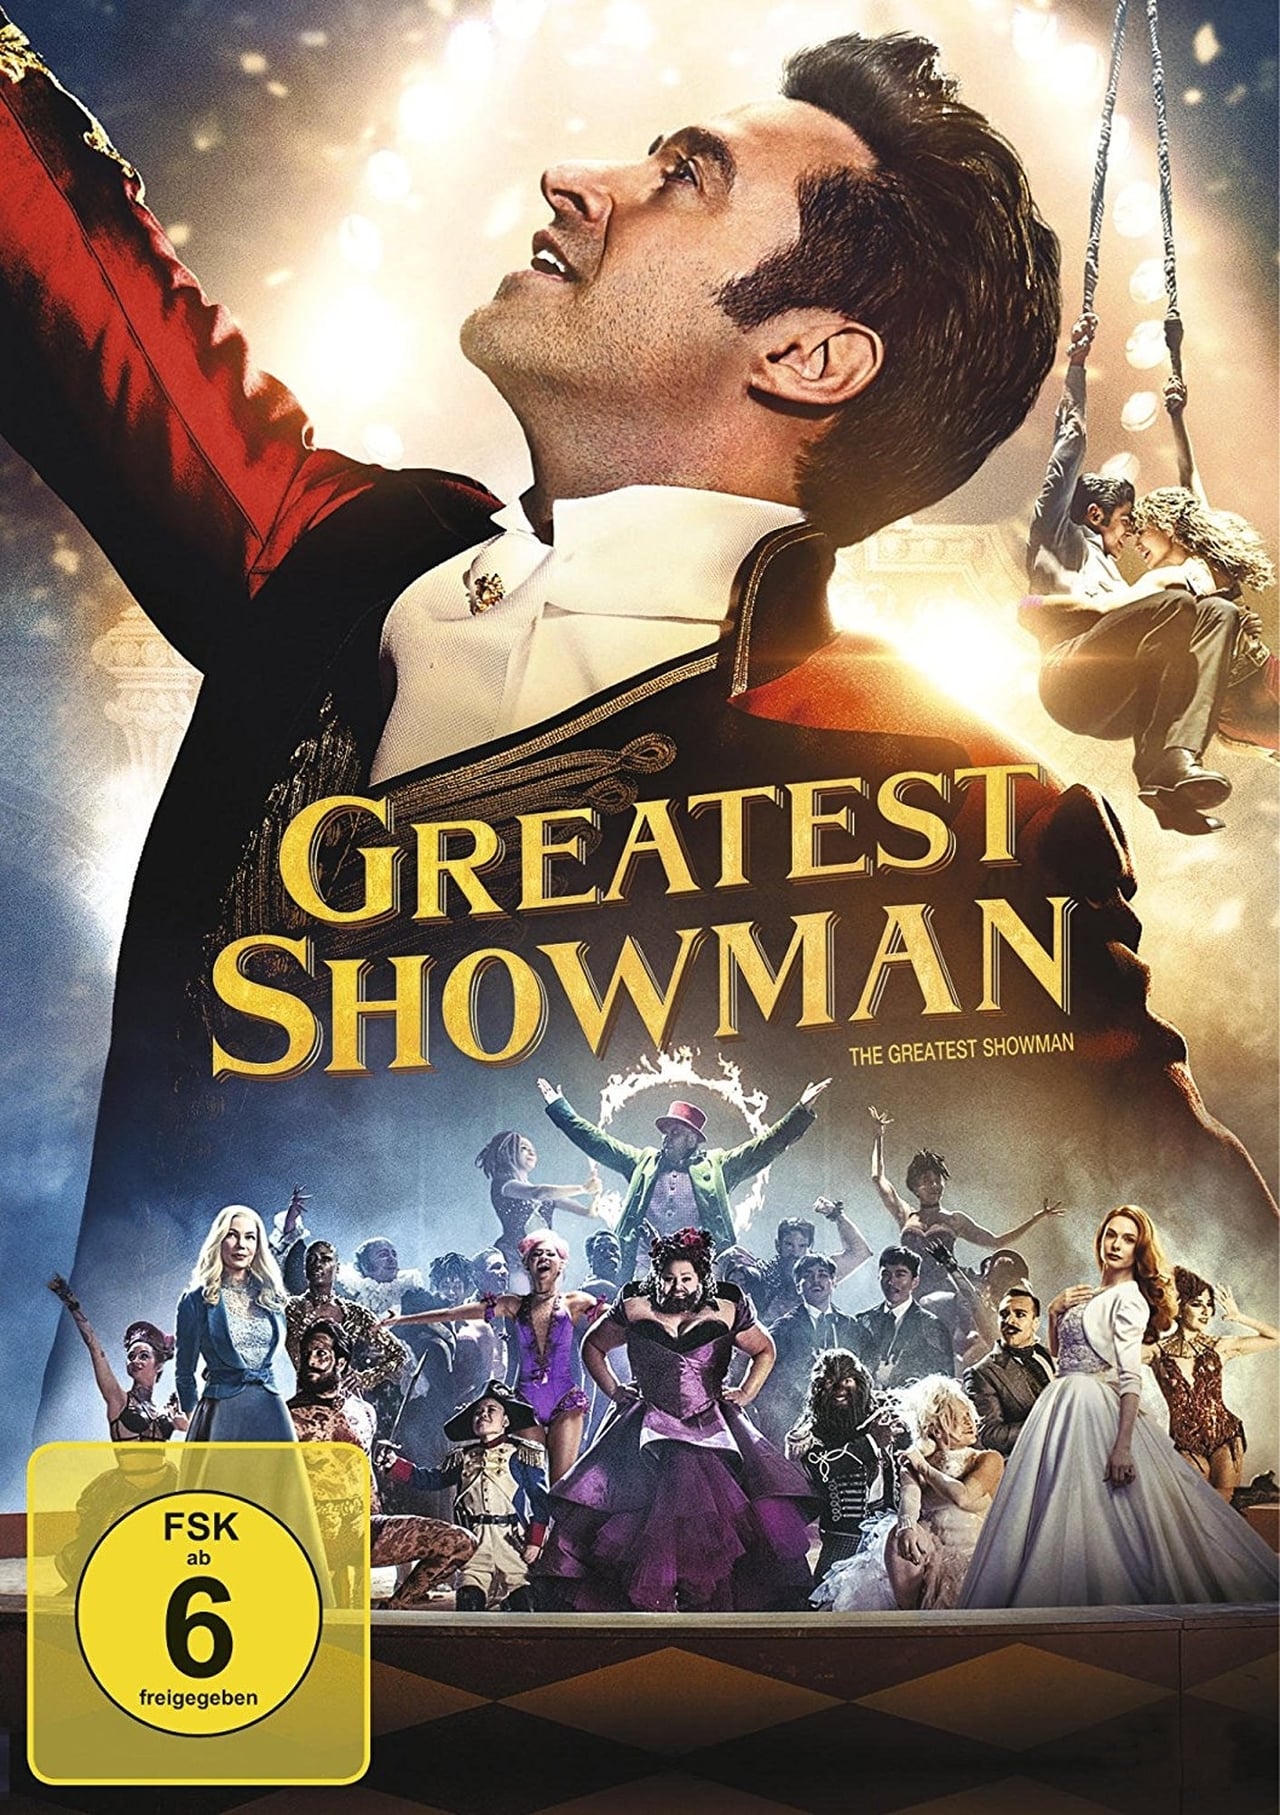 Download Lagu From Now On The Greatest Showman Mp3